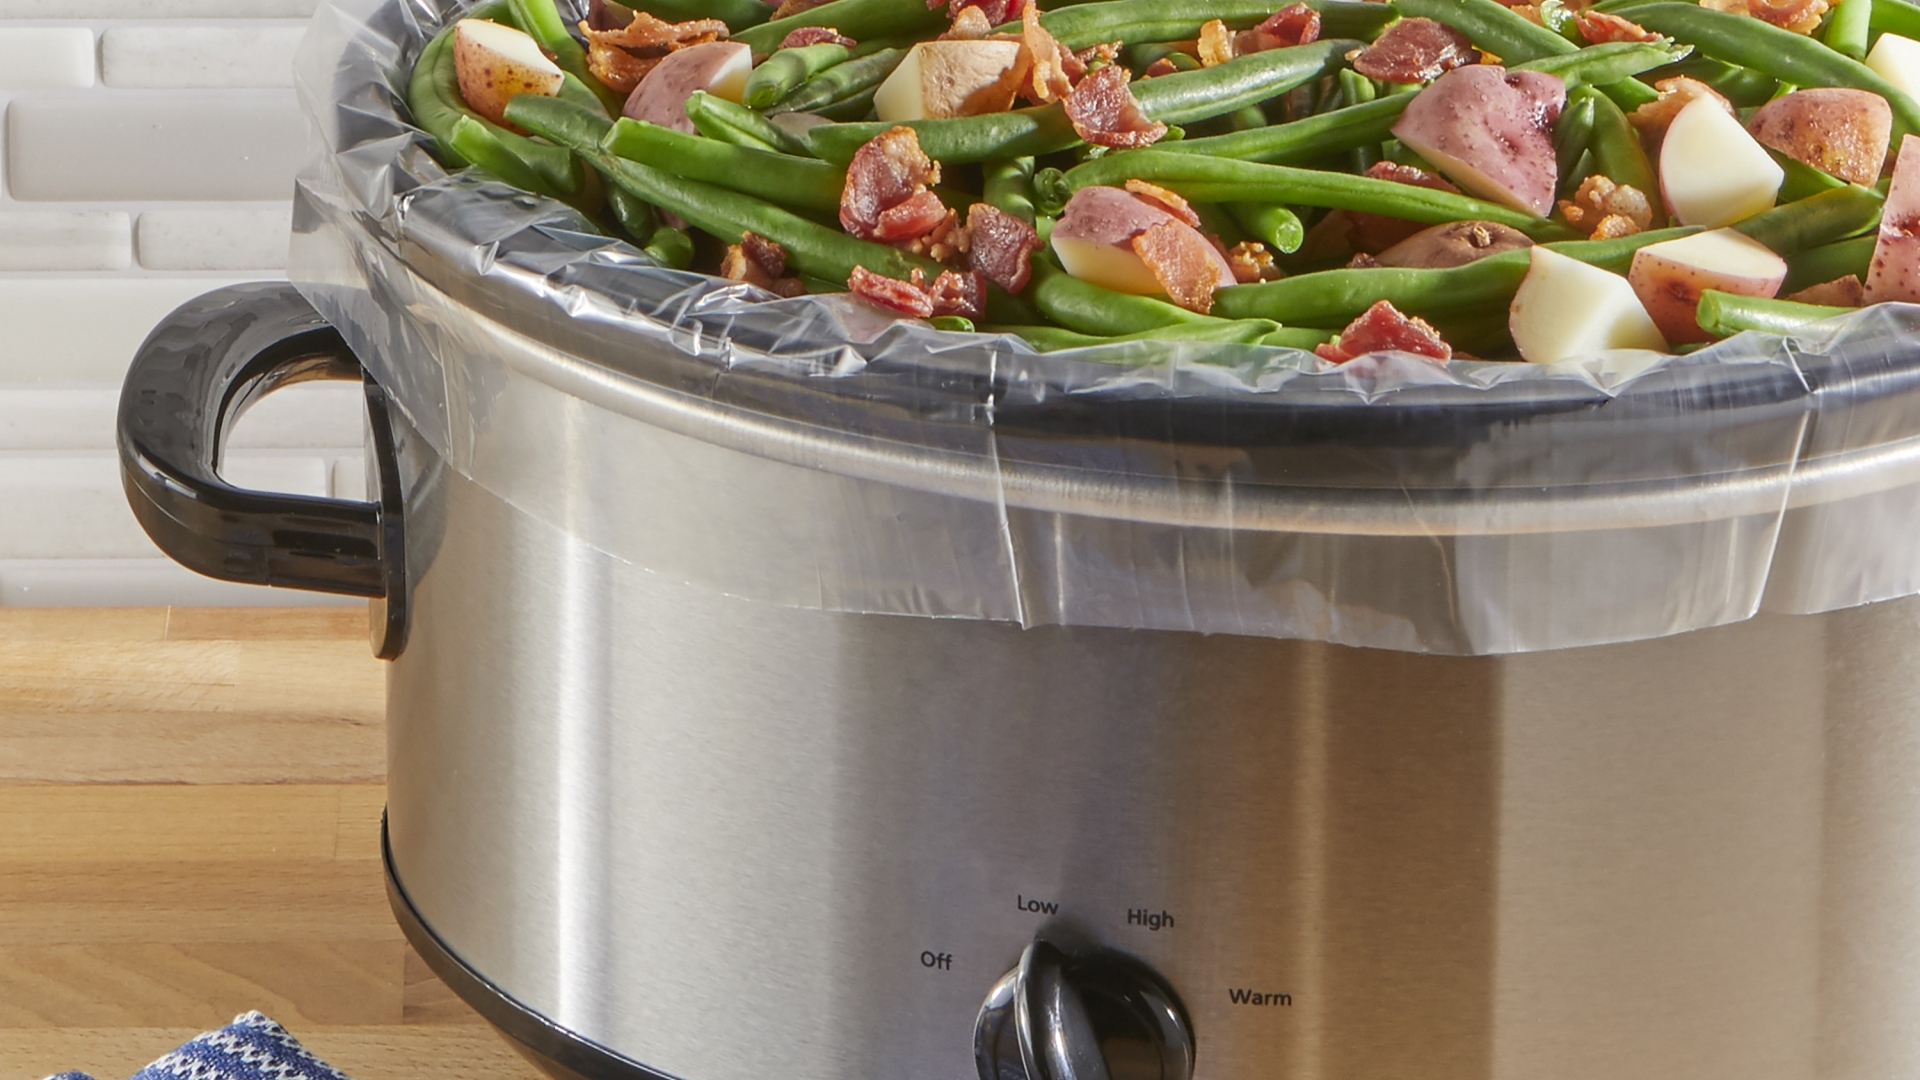 Benefits of Slow Cooker: What is a slow cooker and how to use it